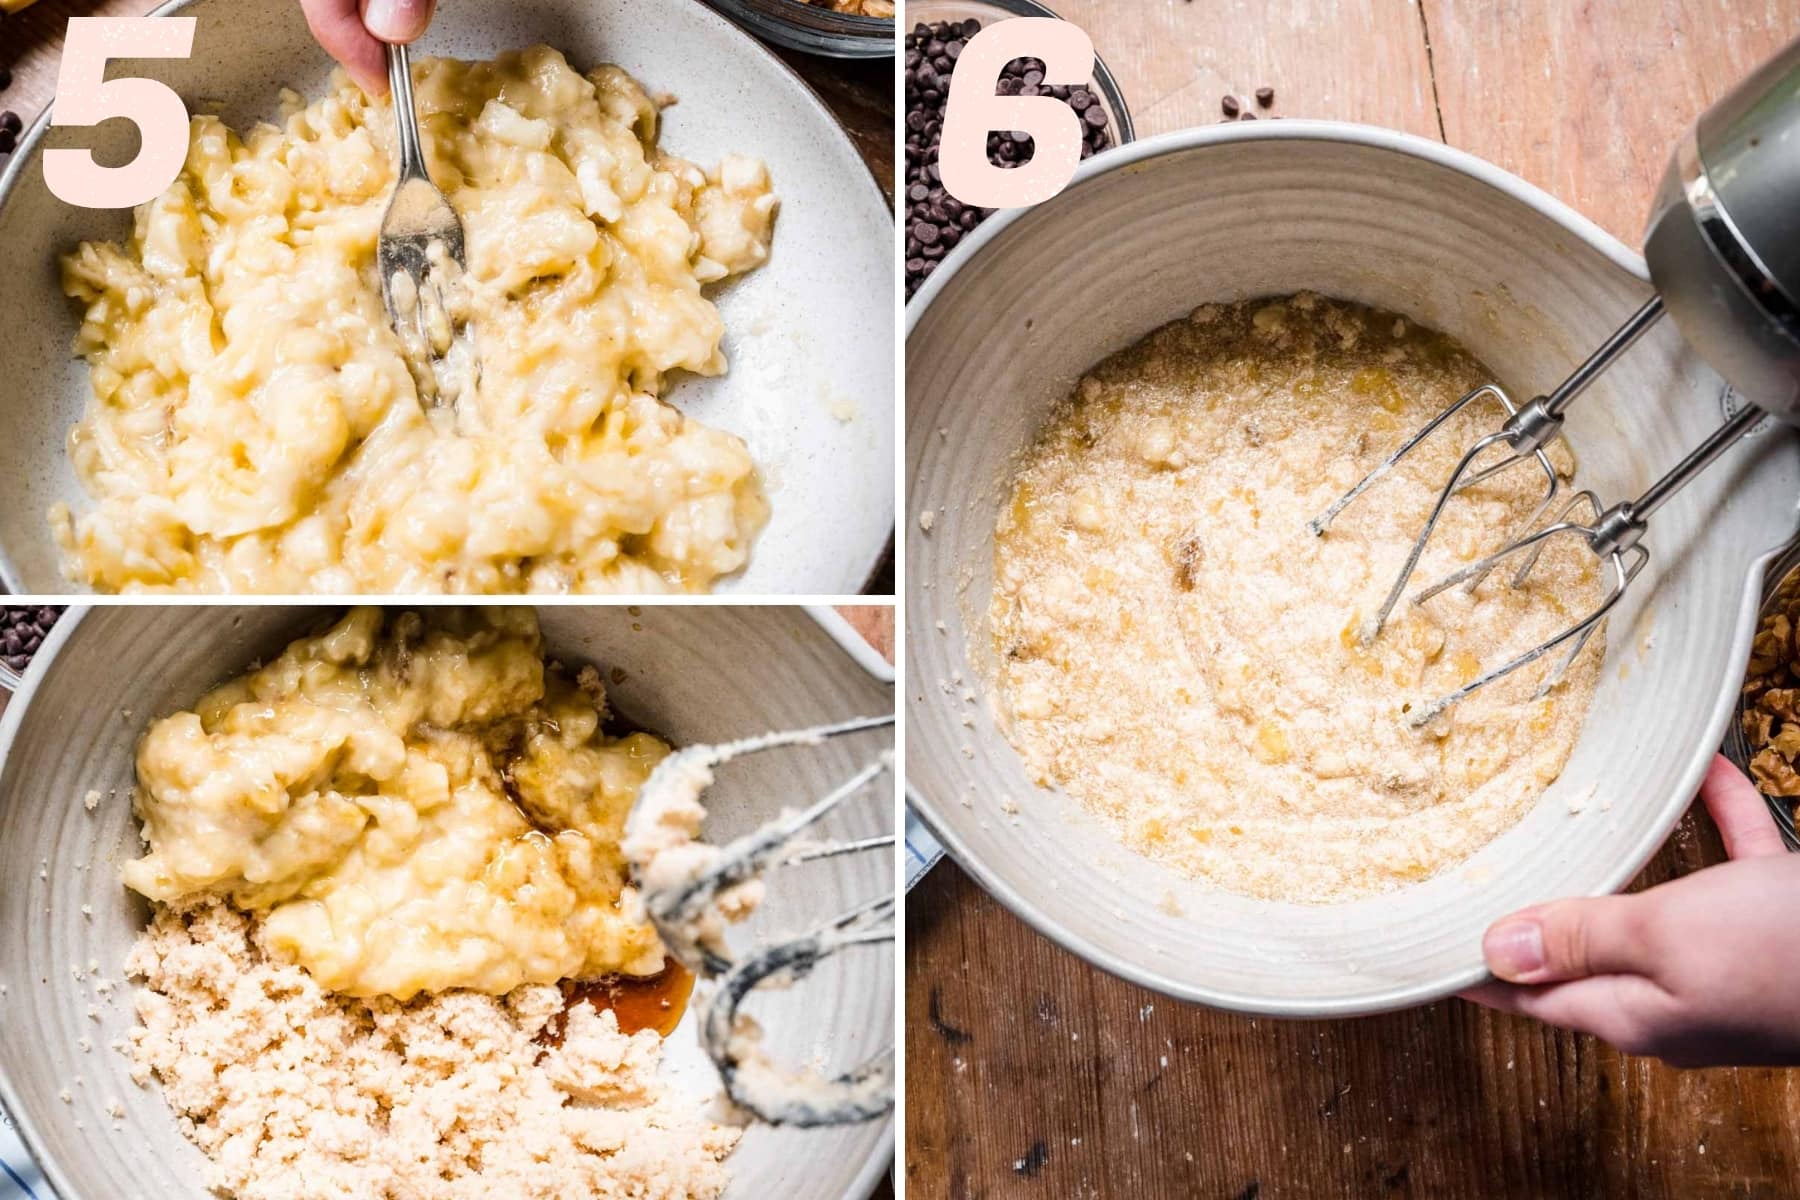 On the left: mashing bananas and then adding them to creamed butter. On the right: mixing in mashed bananas.